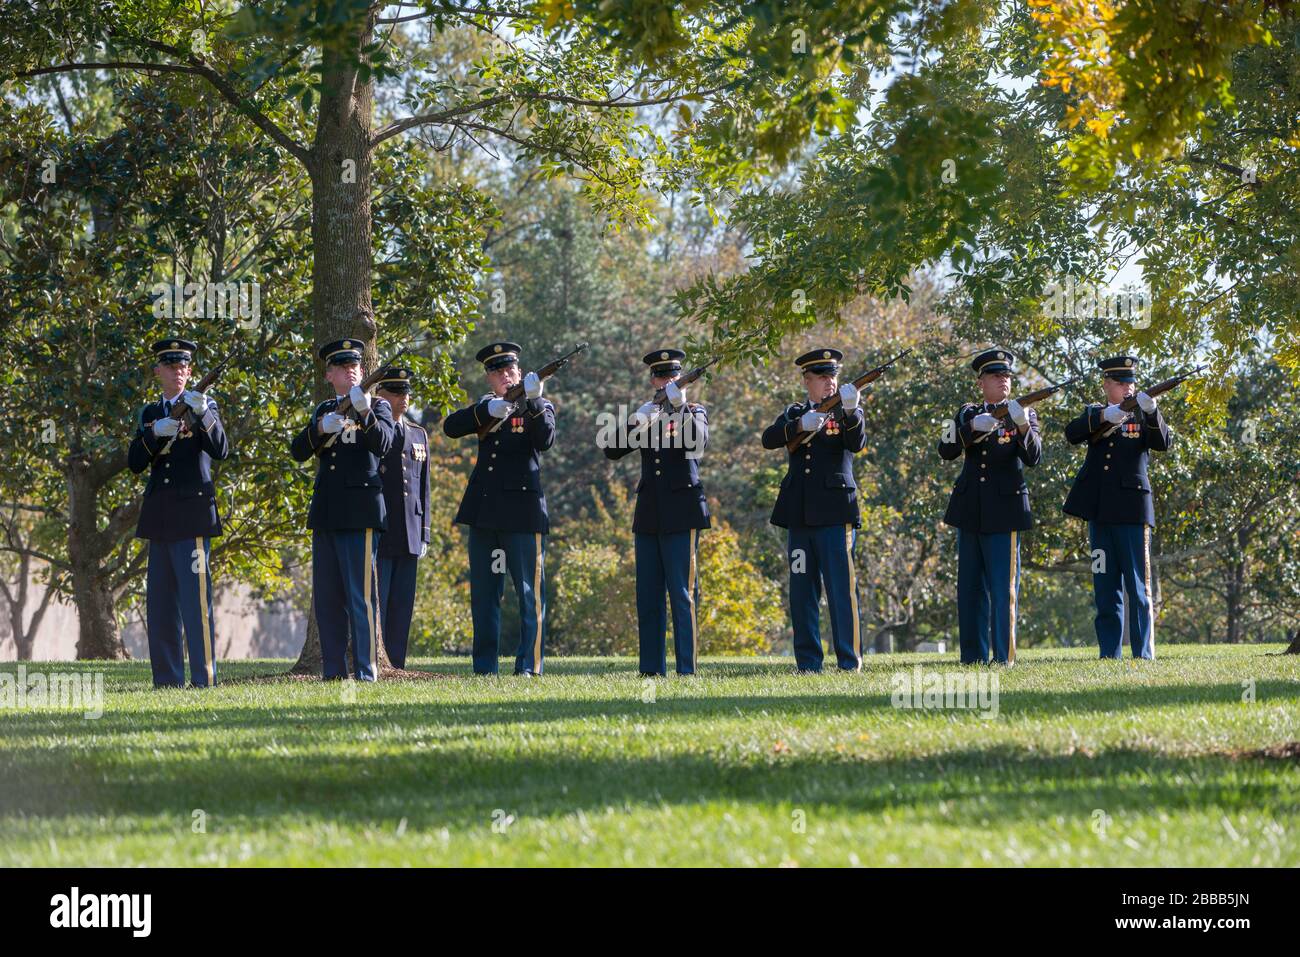 'The 3d U.S. Infantry Regiment (The Old Guard) Firing Party fires 3 volleys during the funeral of U.S. Army Staff Sgt. Alexander Dalida in Section 60 of Arlington National Cemetery, Arlington, Virginia, Oct. 25, 2017.  Dalida, 32, of Dunstable, Massachusetts, was enrolled in the Special Forces Qualification Course at the U.S. Army John F. Kennedy Special Warfare Center and School when he died during a training exercise at Fort Bragg, North Carolina, Sept. 14, 2017. (U.S. Army photo by Elizabeth Fraser / Arlington National Cemetery / released); 25 October 2017, 15:18; Graveside Service for U.S. Stock Photo